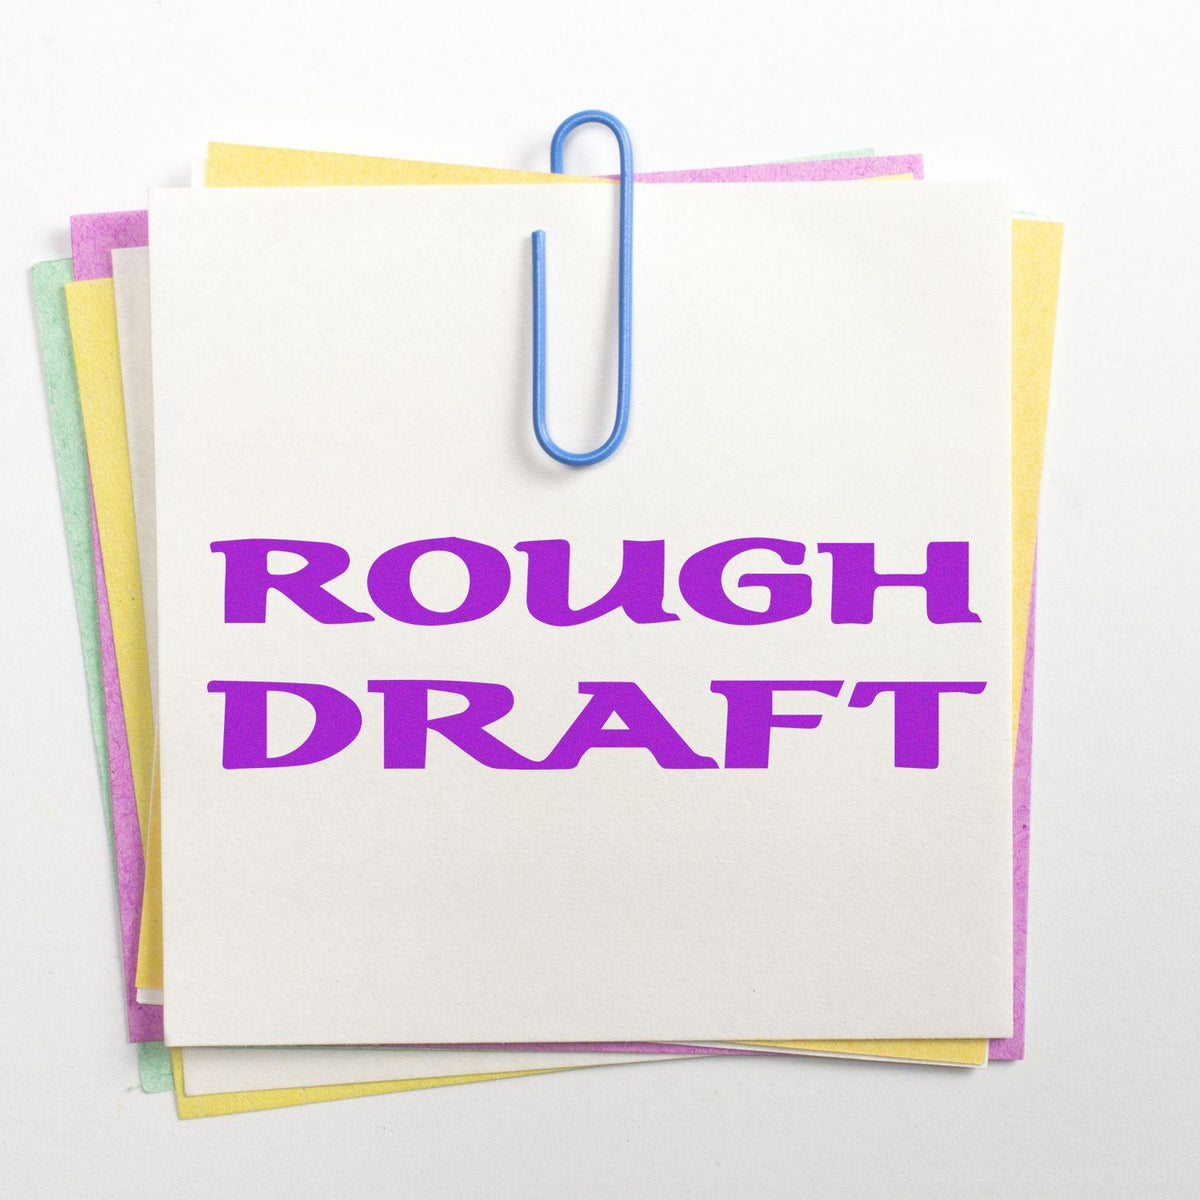 Bold Rough Draft Rubber Stamp In Use Photo